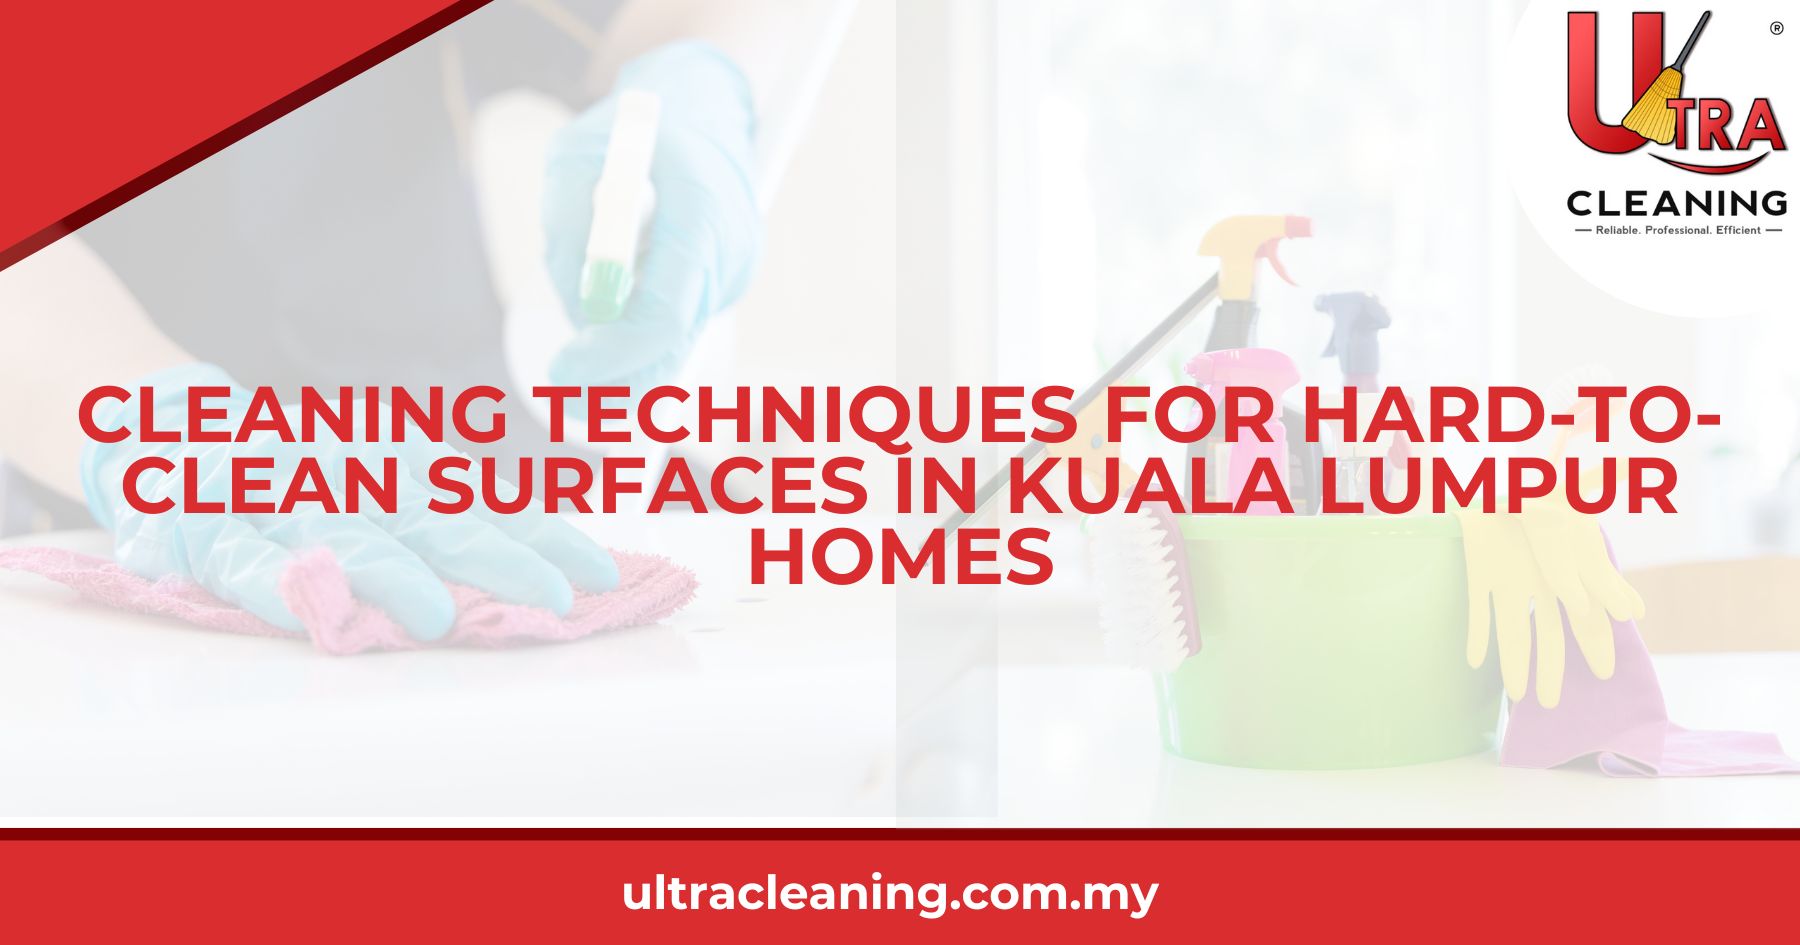 Cleaning Techniques for Hard-to-Clean Surfaces in Kuala Lumpur Homes